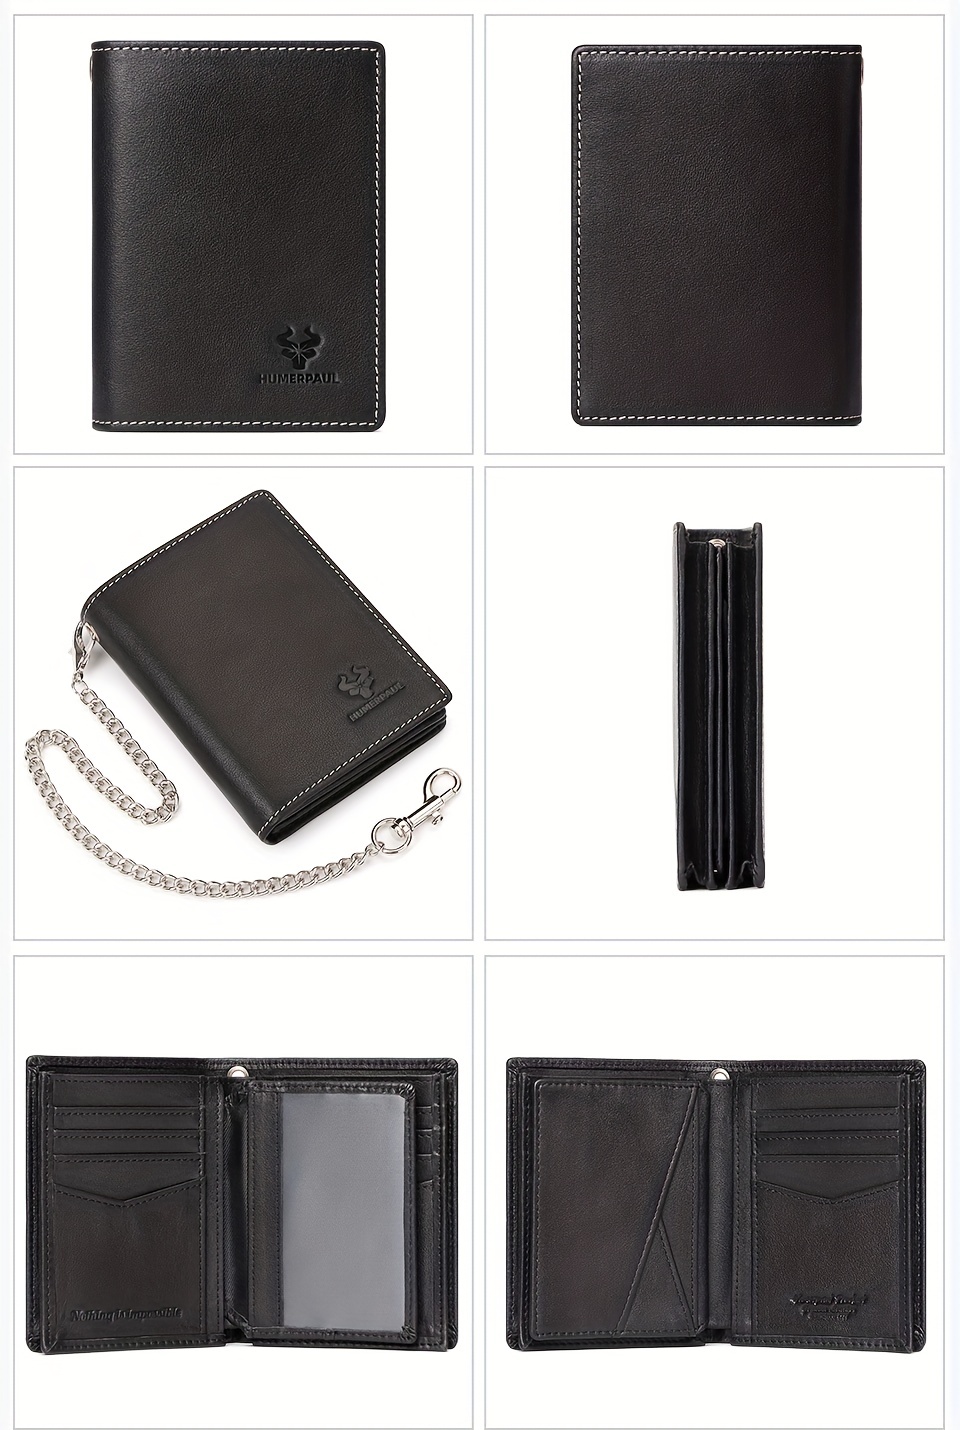 Wallets with chain - Black - men - 9 products